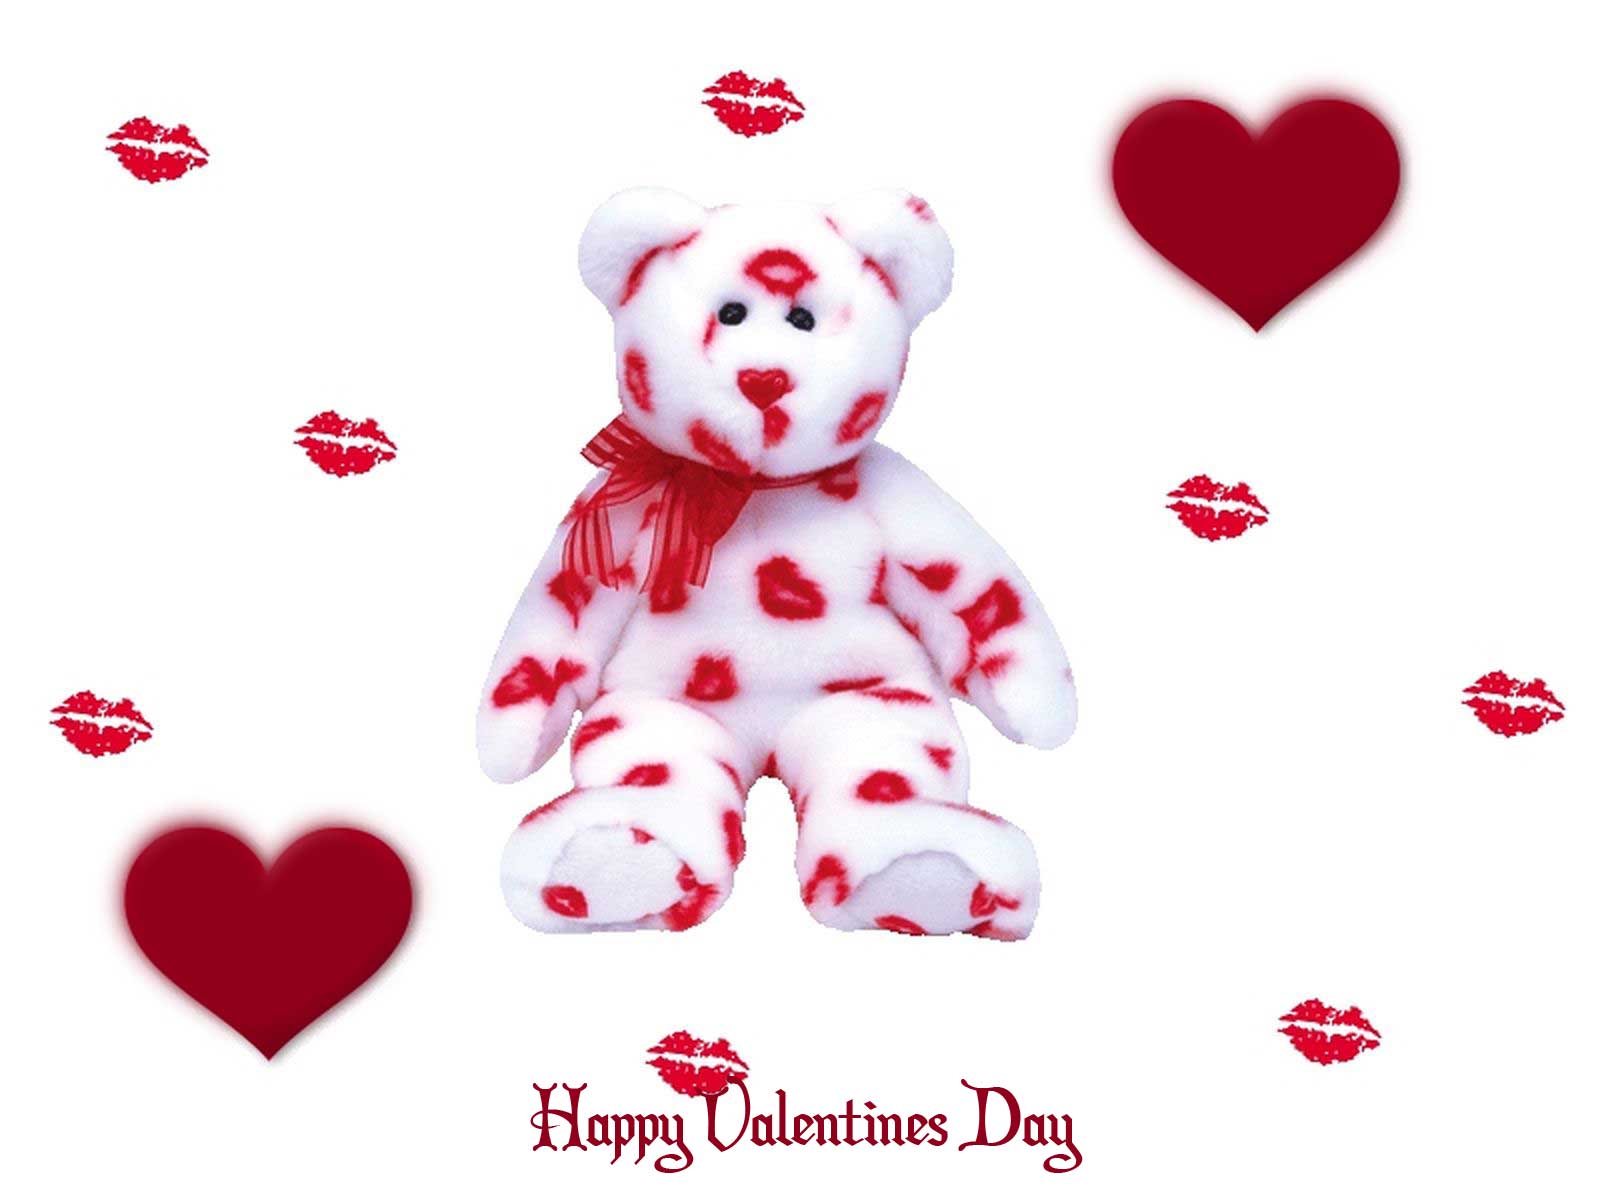 From Cupid a Very Happy Valentines Day to All of You BK Mag